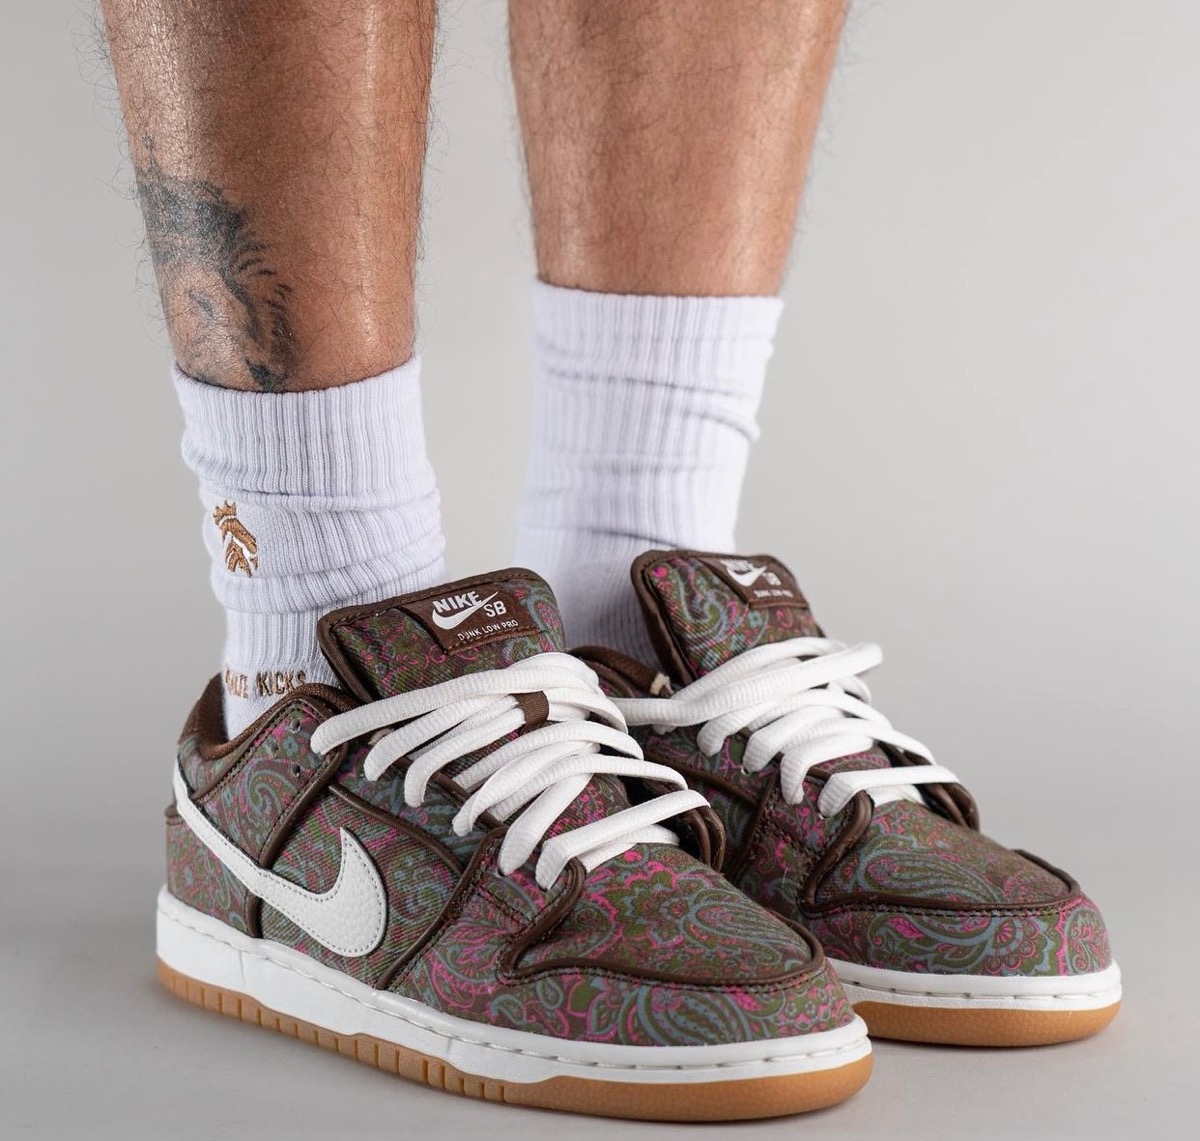 Nike SB Dunk Low Pro PRM “Paisley”が国内5月26日／6月4日に発売予定 | UP TO DATE